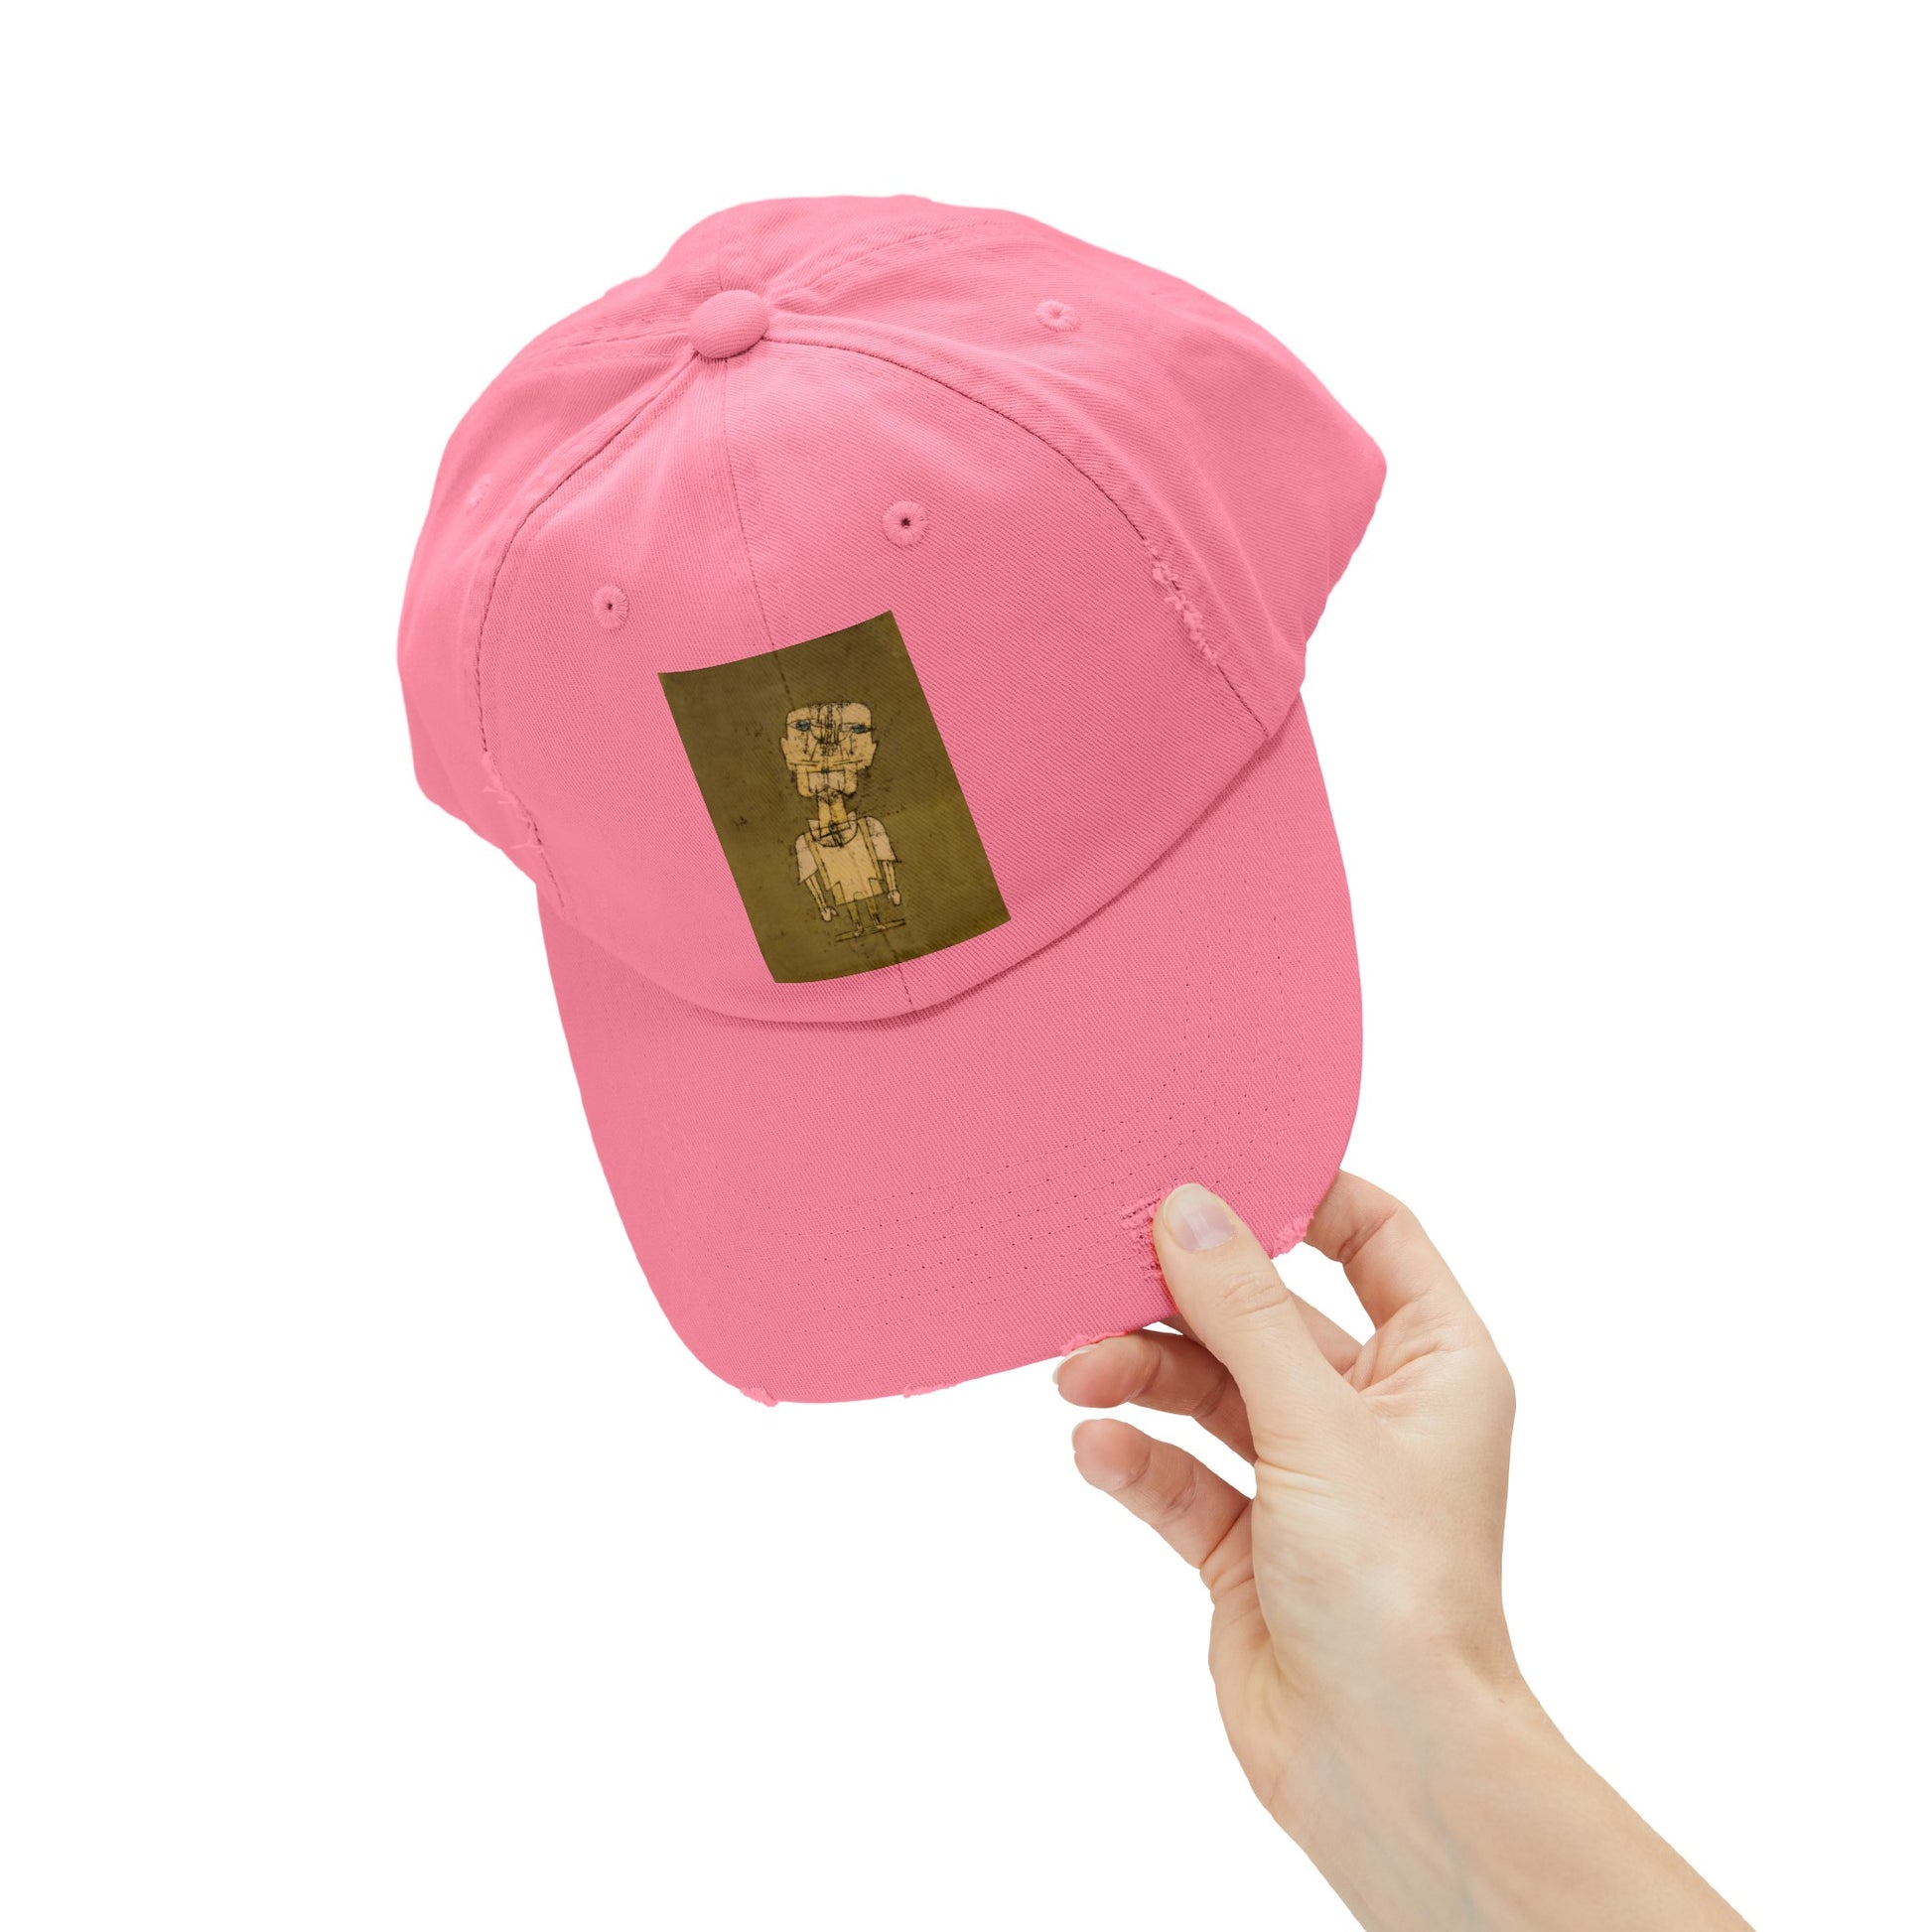 a pink baseball cap with a picture of a dog on it